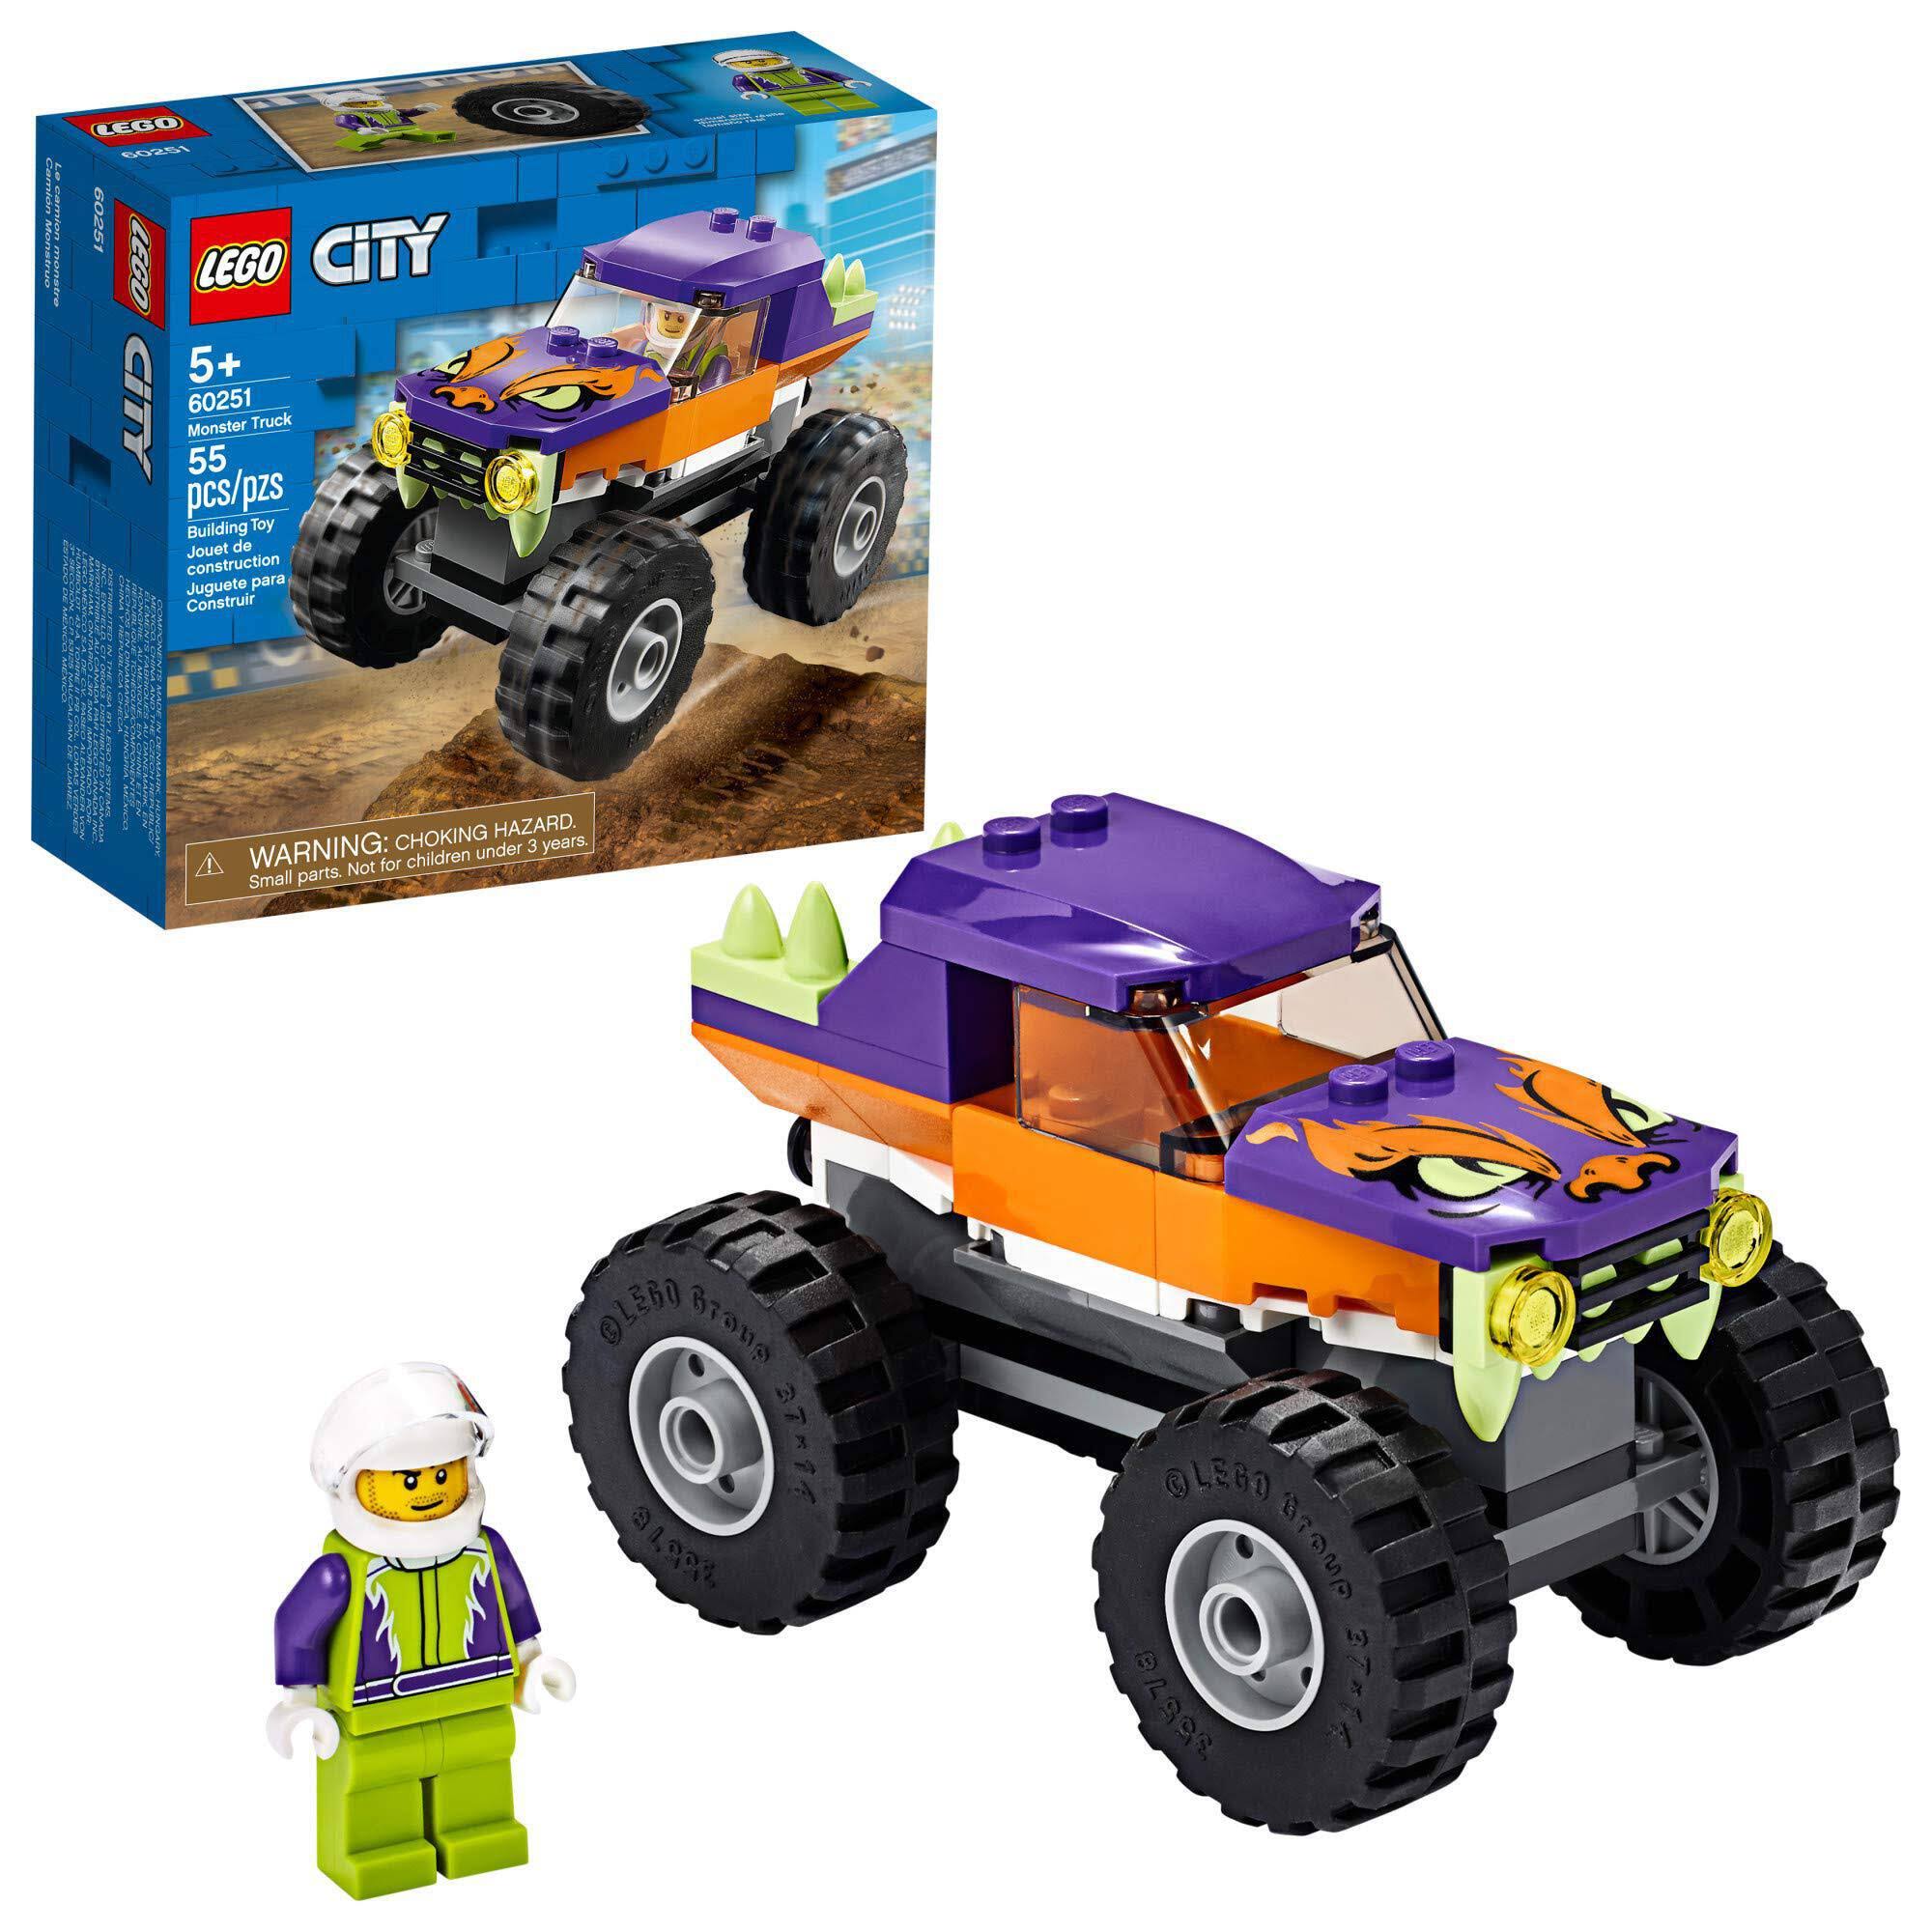 LEGO City Great Vehicles: Monster Truck (60251)